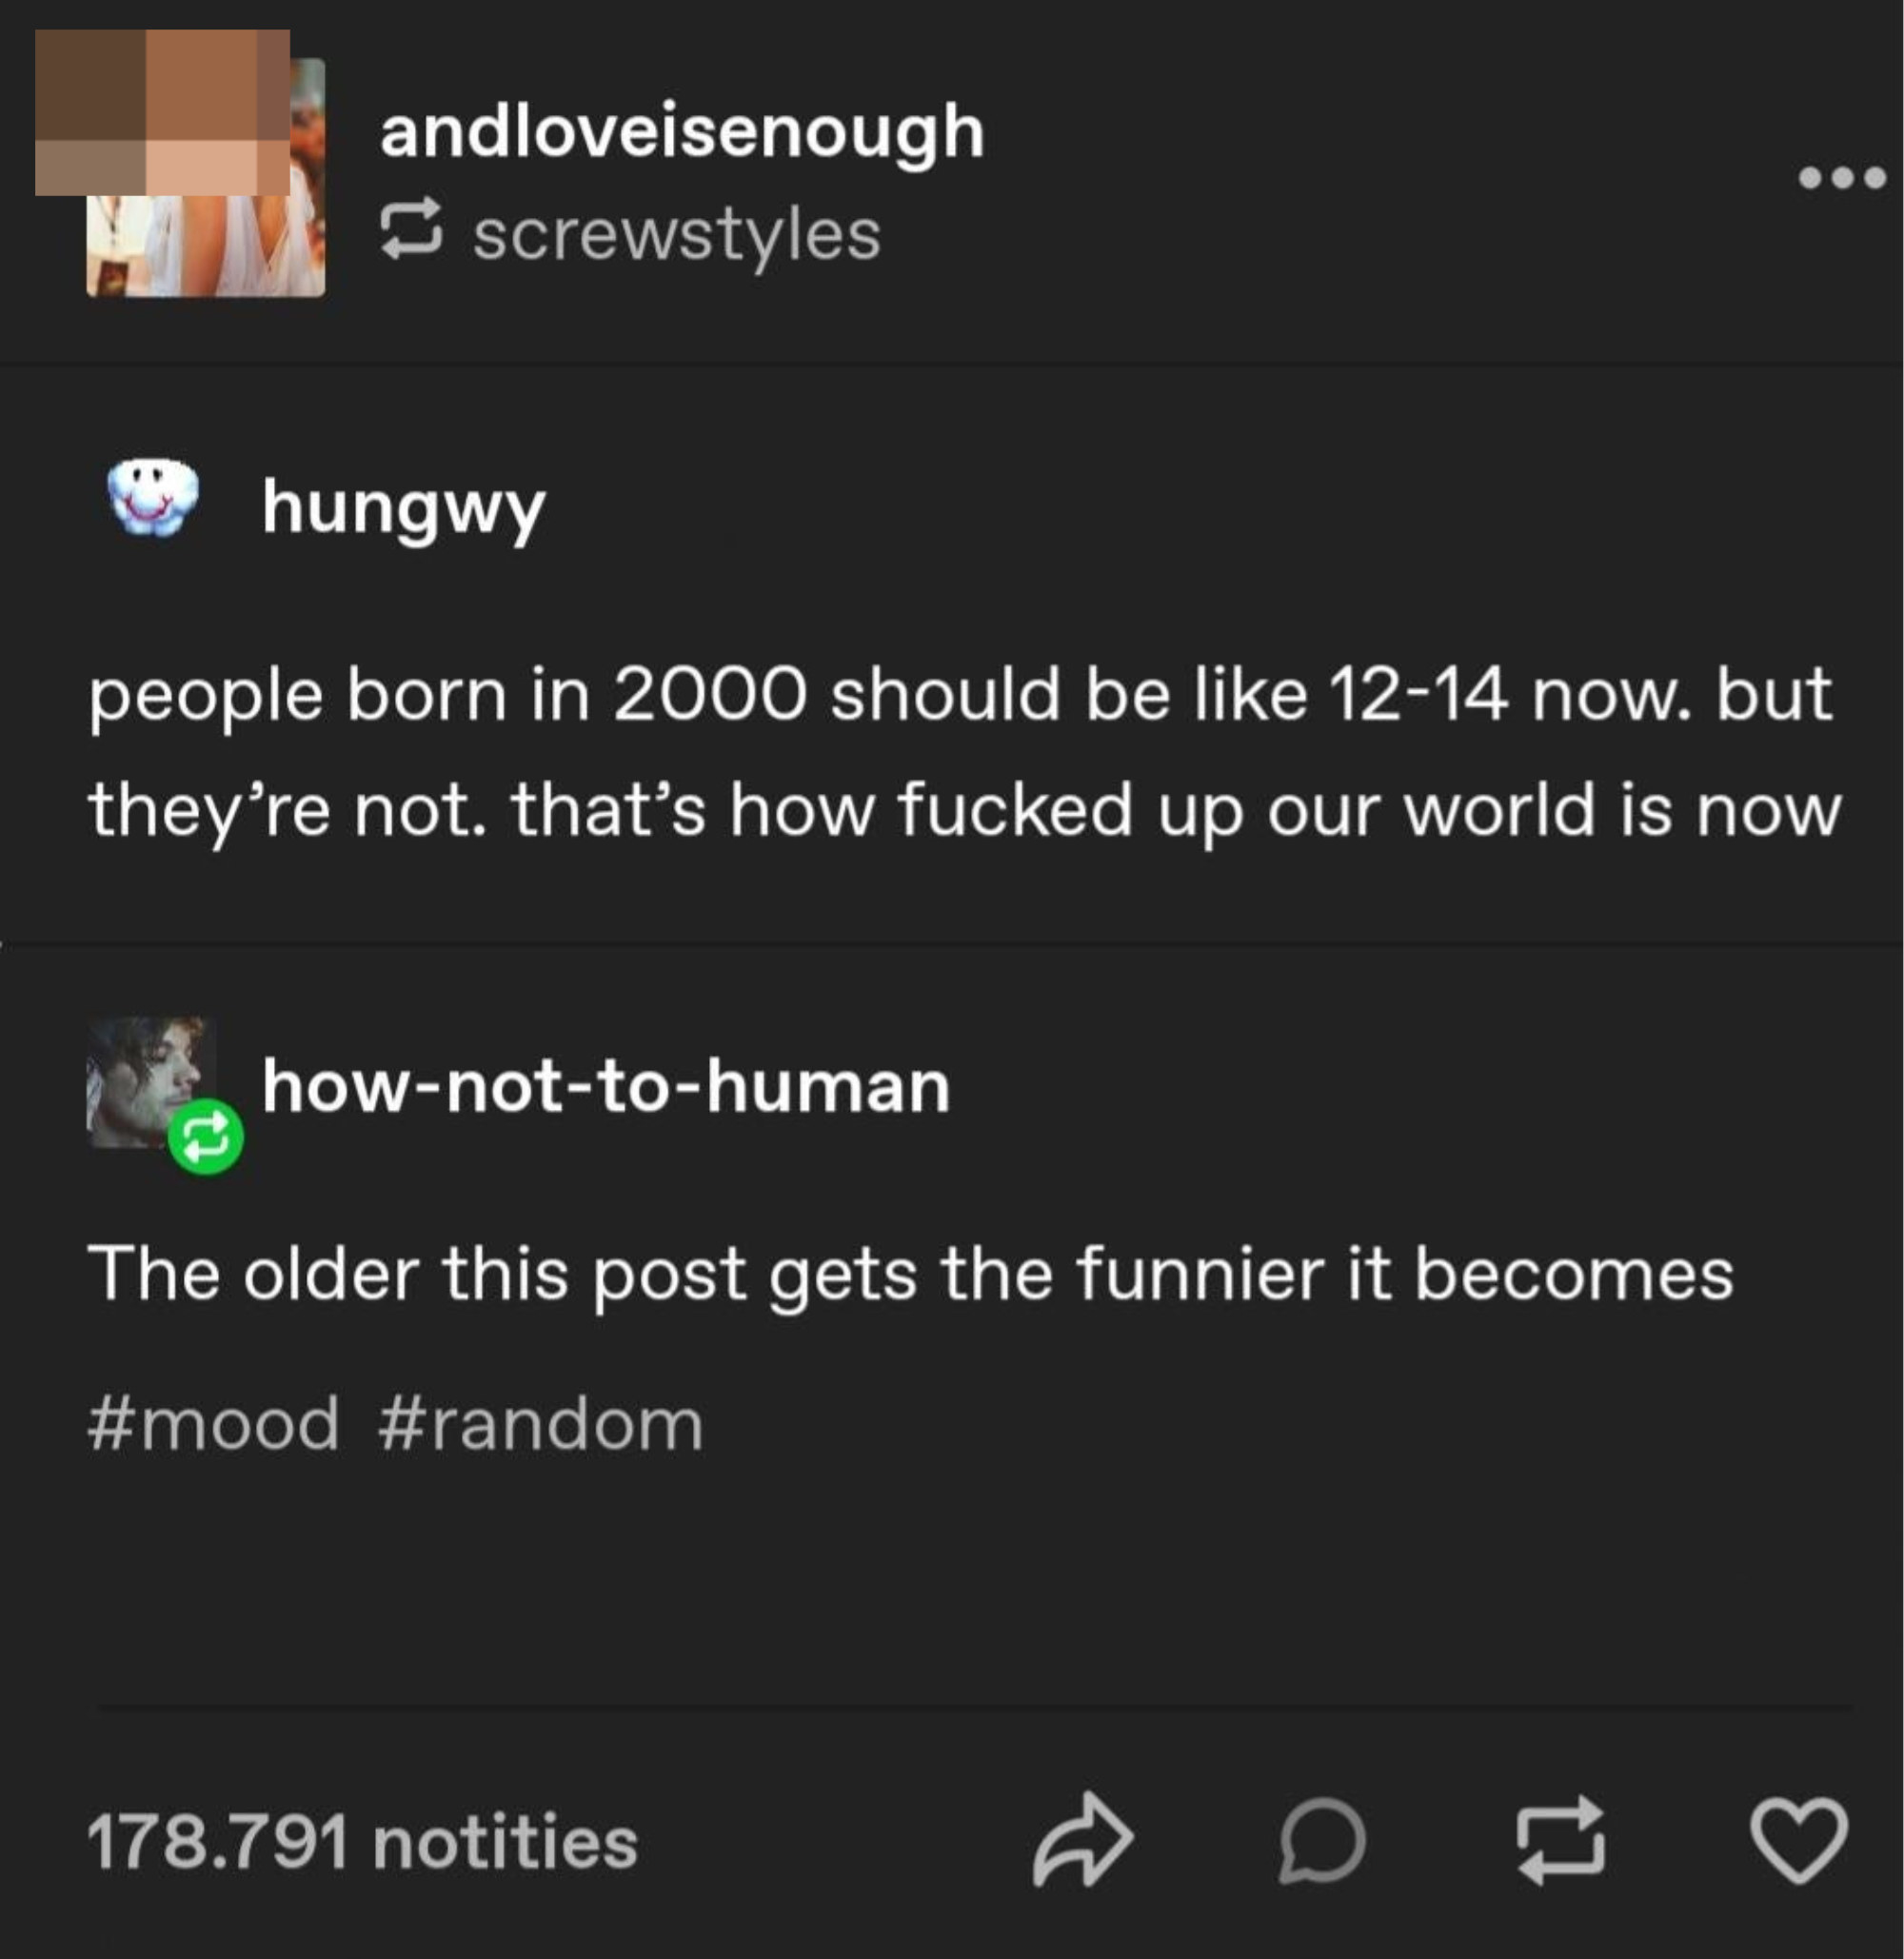 Someone says people born in 2000 should be 12–14 and they&#x27;re not, and that&#x27;s how fucked up the world is, and someone responds that the older this post gets, the funnier it becomes